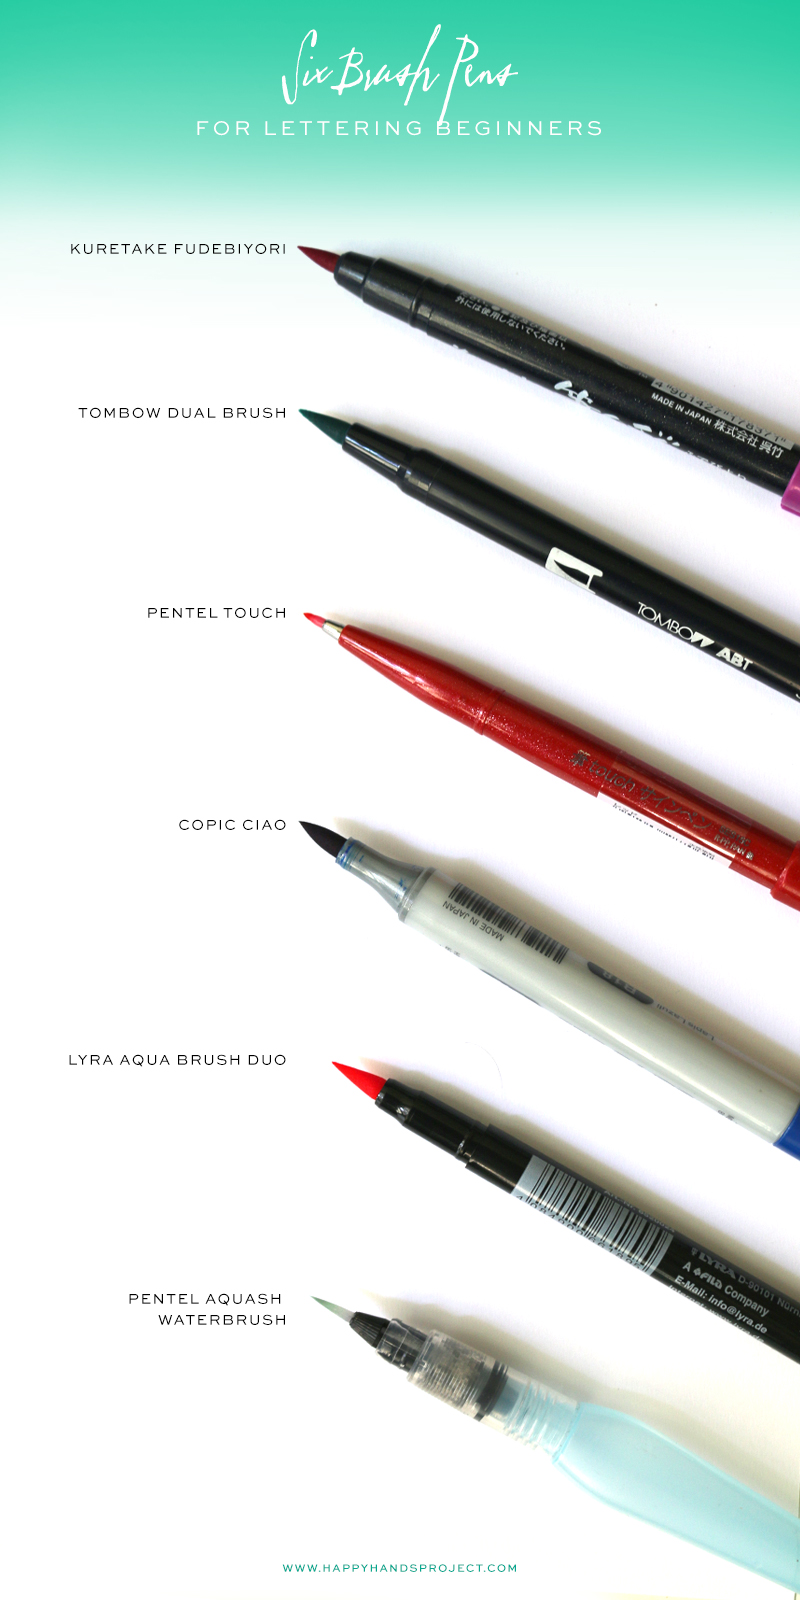 Brush Pens For Beginners via Happy Hands Project